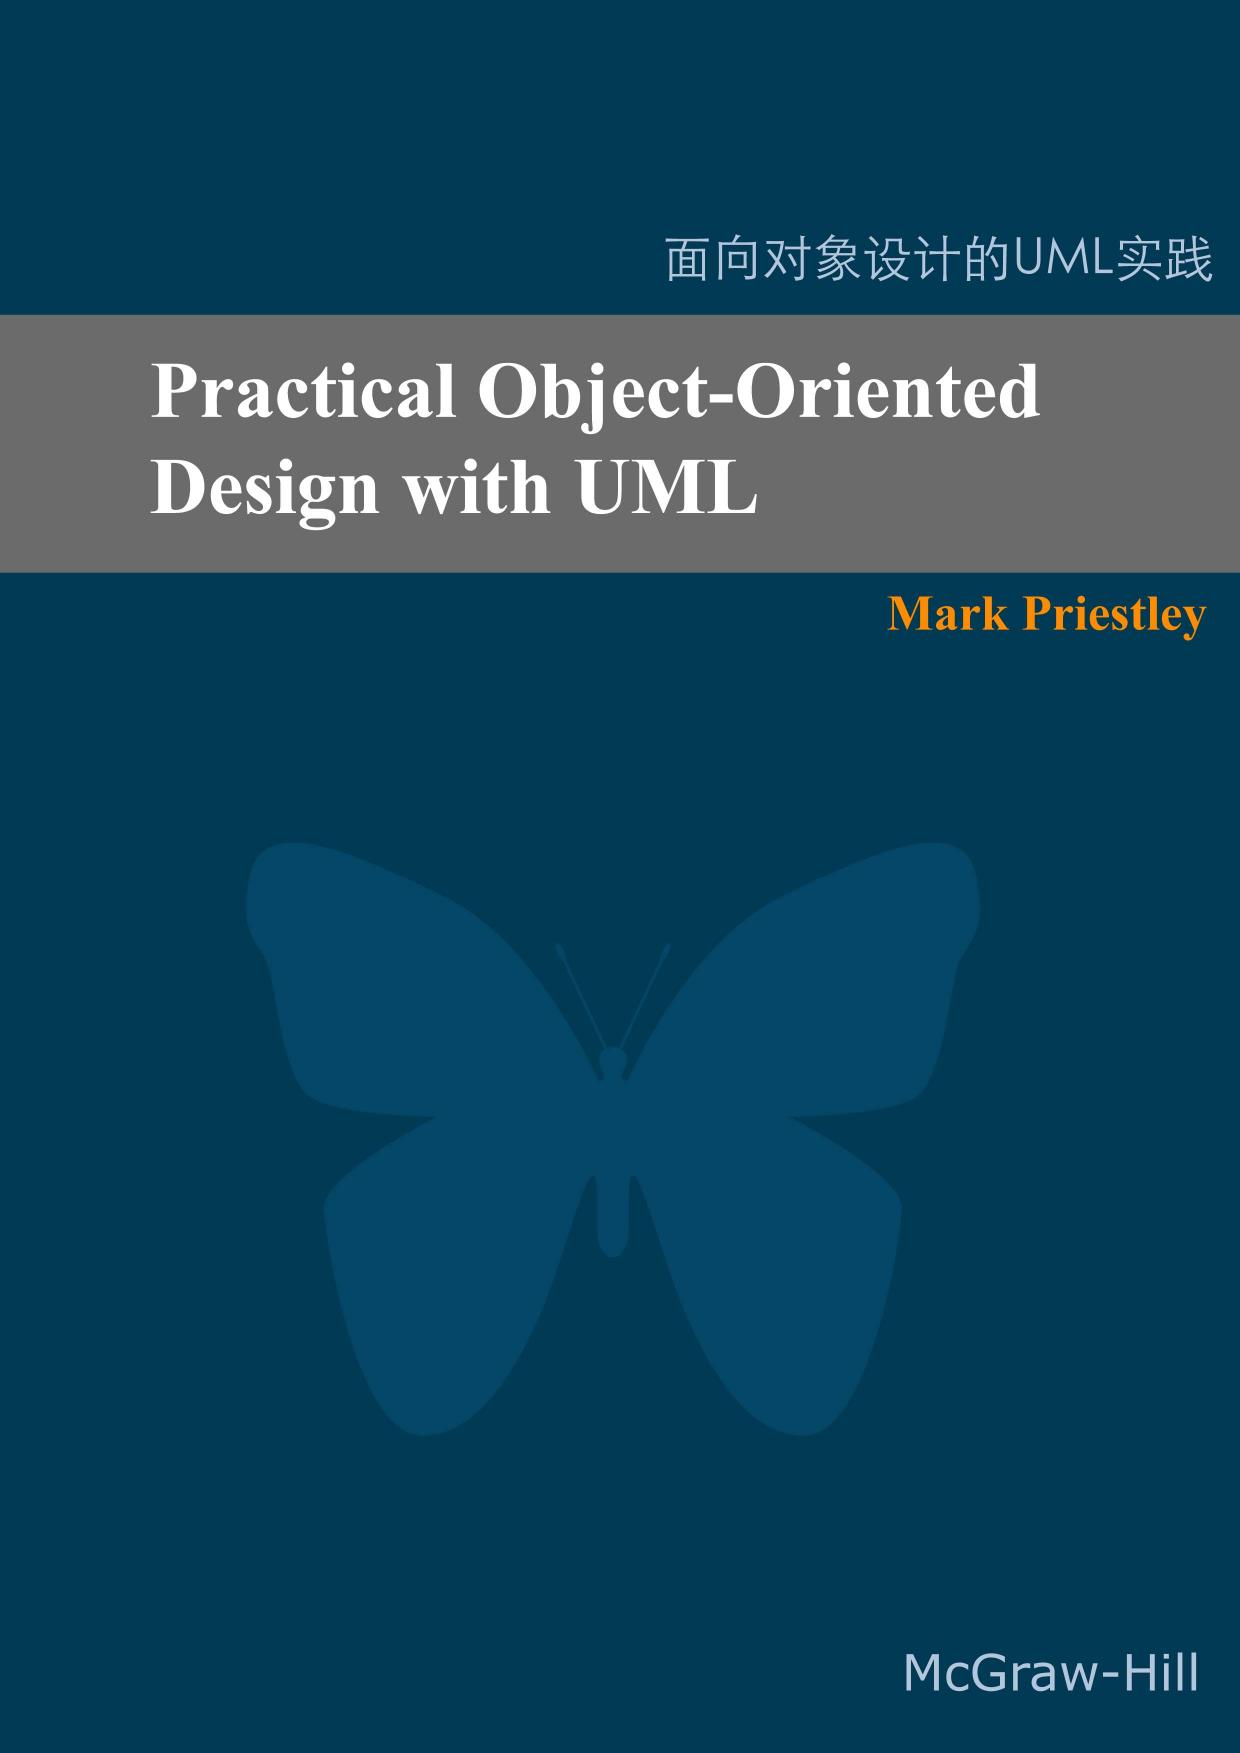 Practical object-oriented design with UML